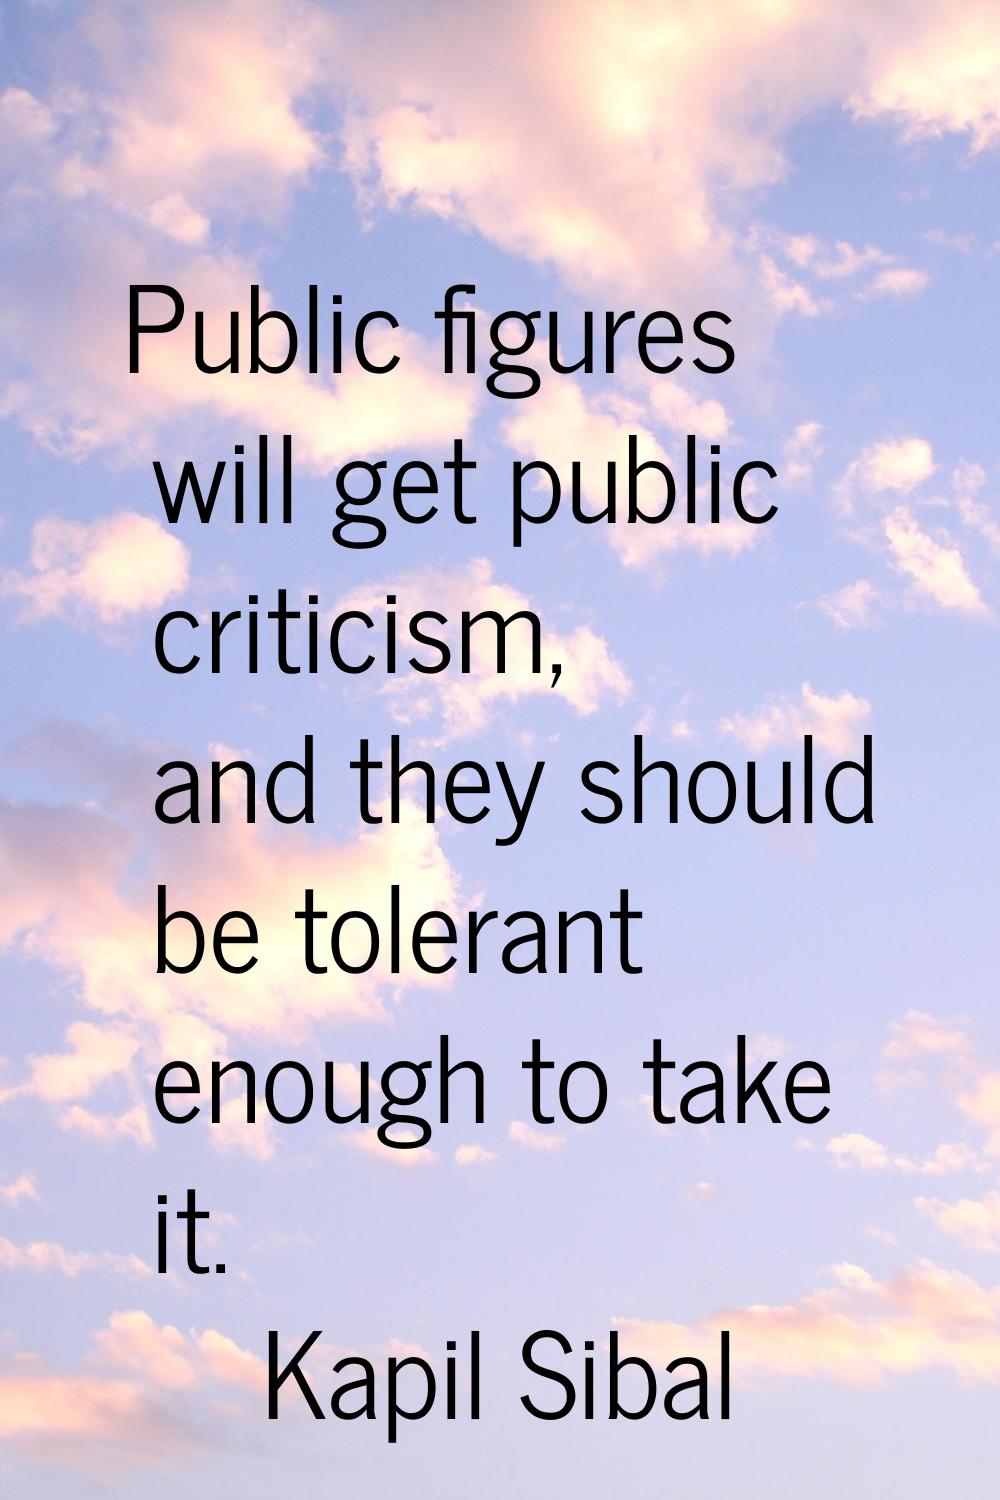 Public figures will get public criticism, and they should be tolerant enough to take it.